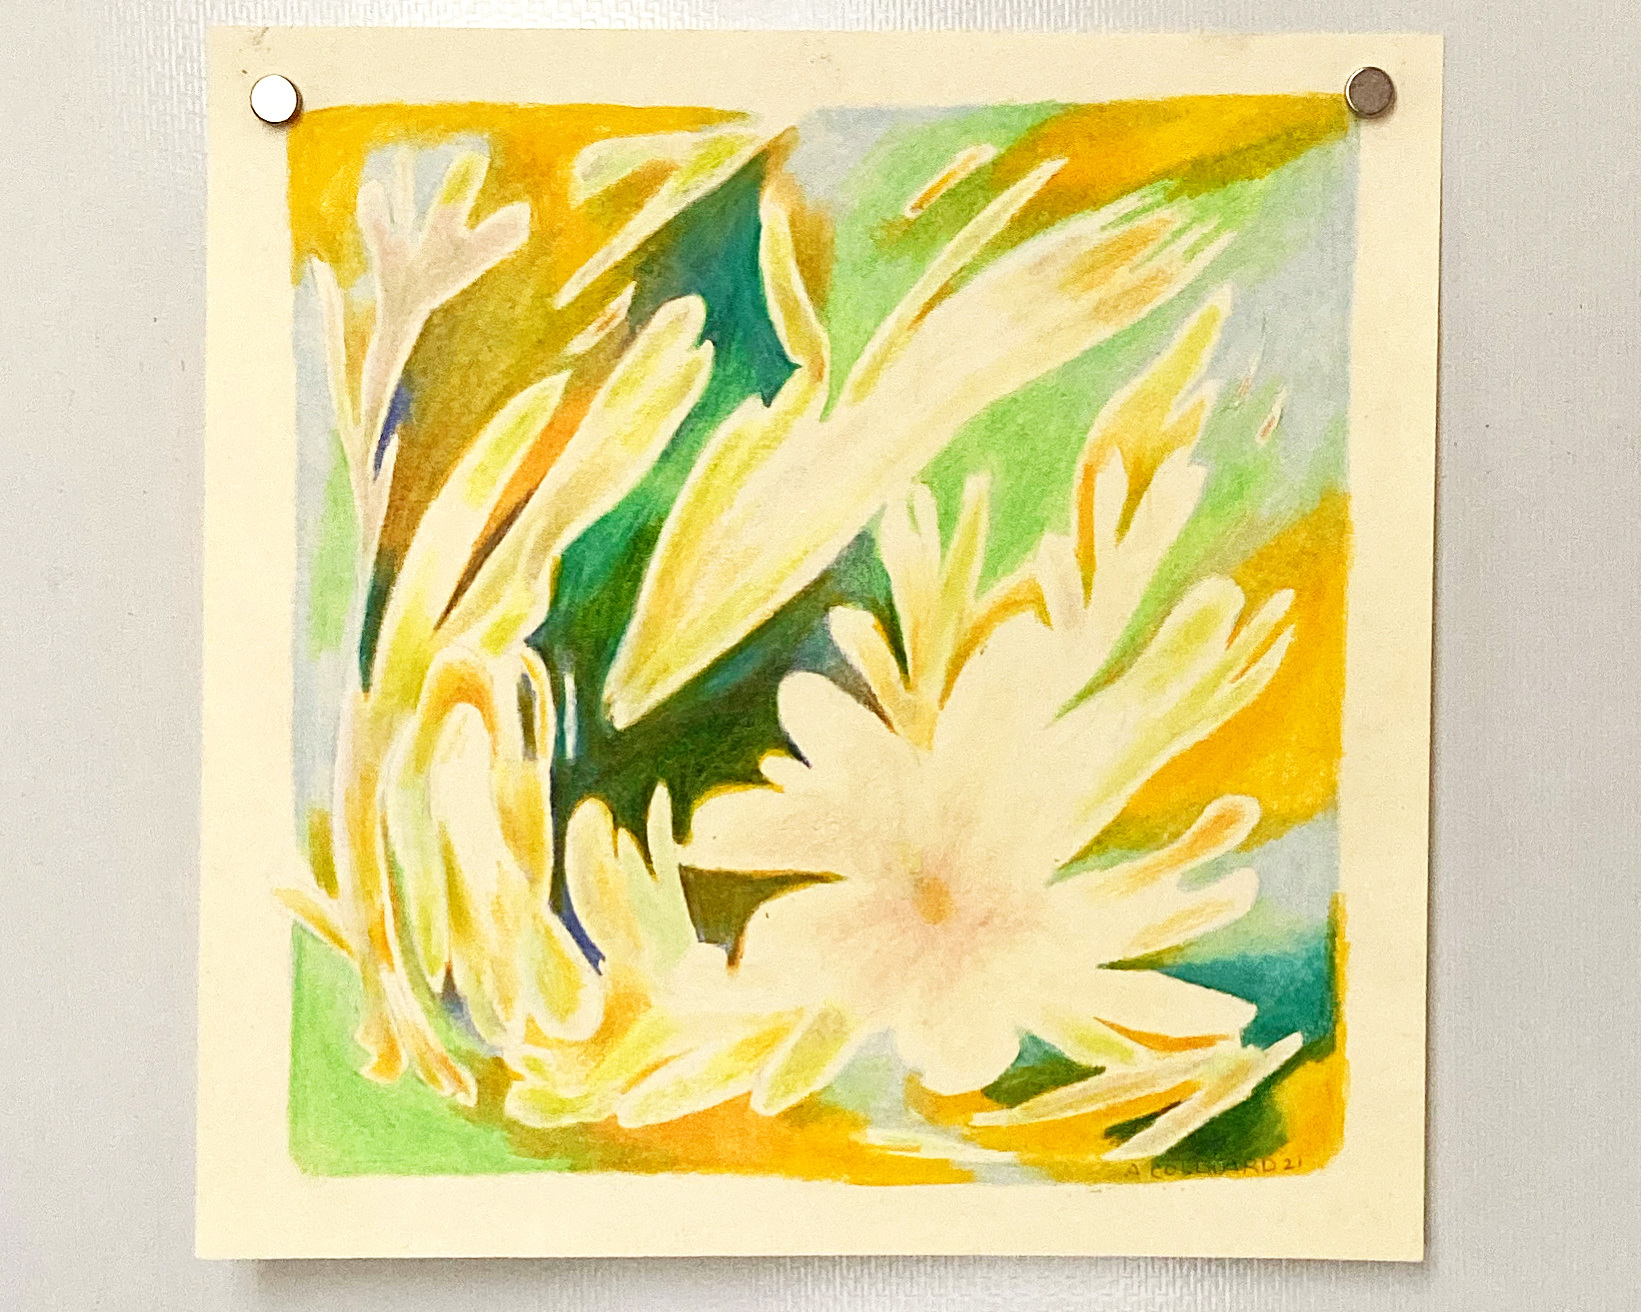 Abstract flower design in greens and yellows